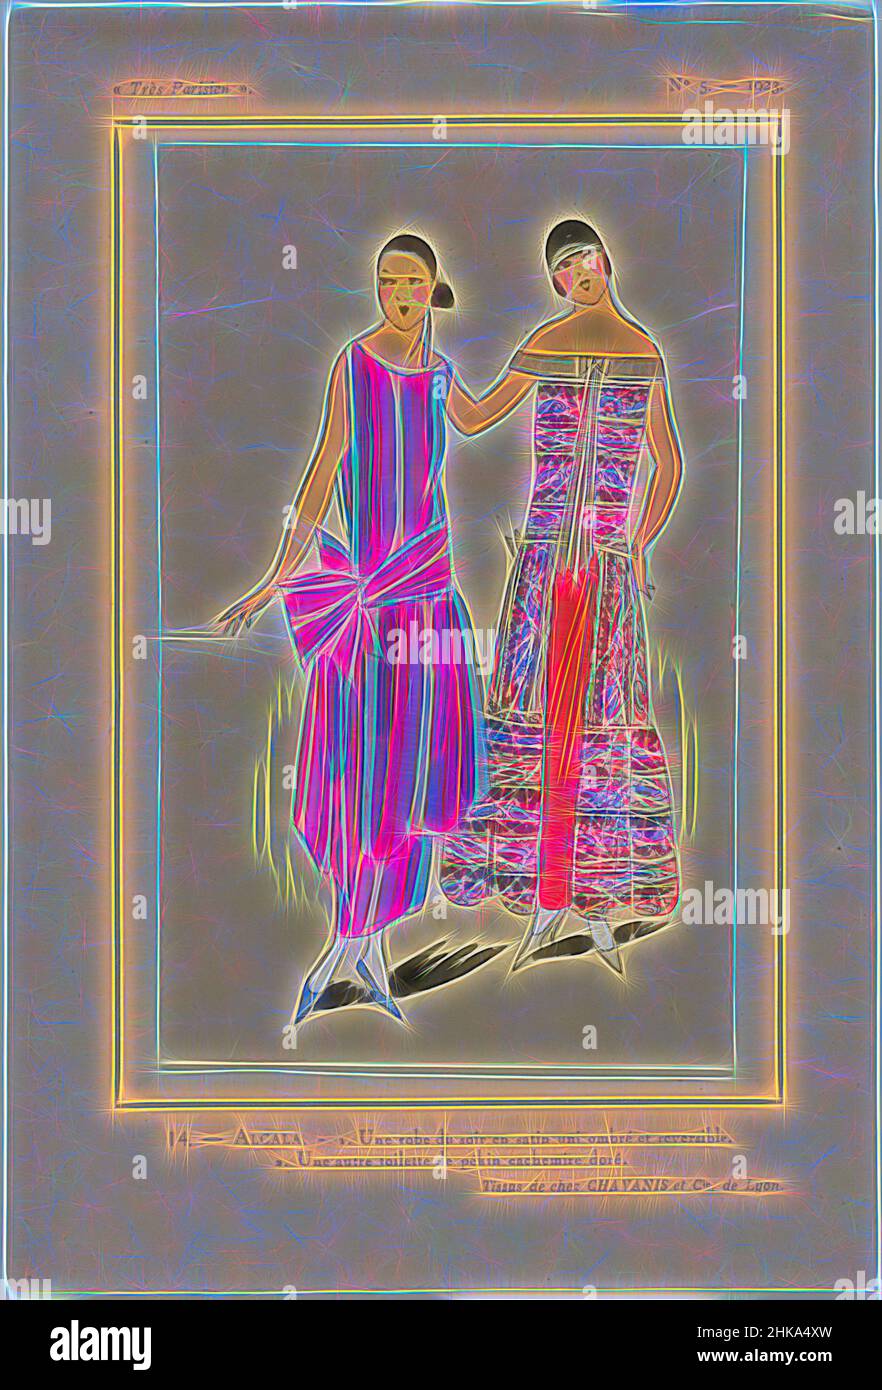 Inspired by Très Parisien, 1923, No 5: 14.- ALCALA. - 1. Une robe du soir..., 1. An evening gown of silk 'uni ombré et reversible' (?). 2. The other toilette is of golden 'pékin cachemire' (cashmere). Fabrics from Chavanis et Cie. Print from the fashion magazine Très Parisien (1920-1936)., print, Reimagined by Artotop. Classic art reinvented with a modern twist. Design of warm cheerful glowing of brightness and light ray radiance. Photography inspired by surrealism and futurism, embracing dynamic energy of modern technology, movement, speed and revolutionize culture Stock Photo